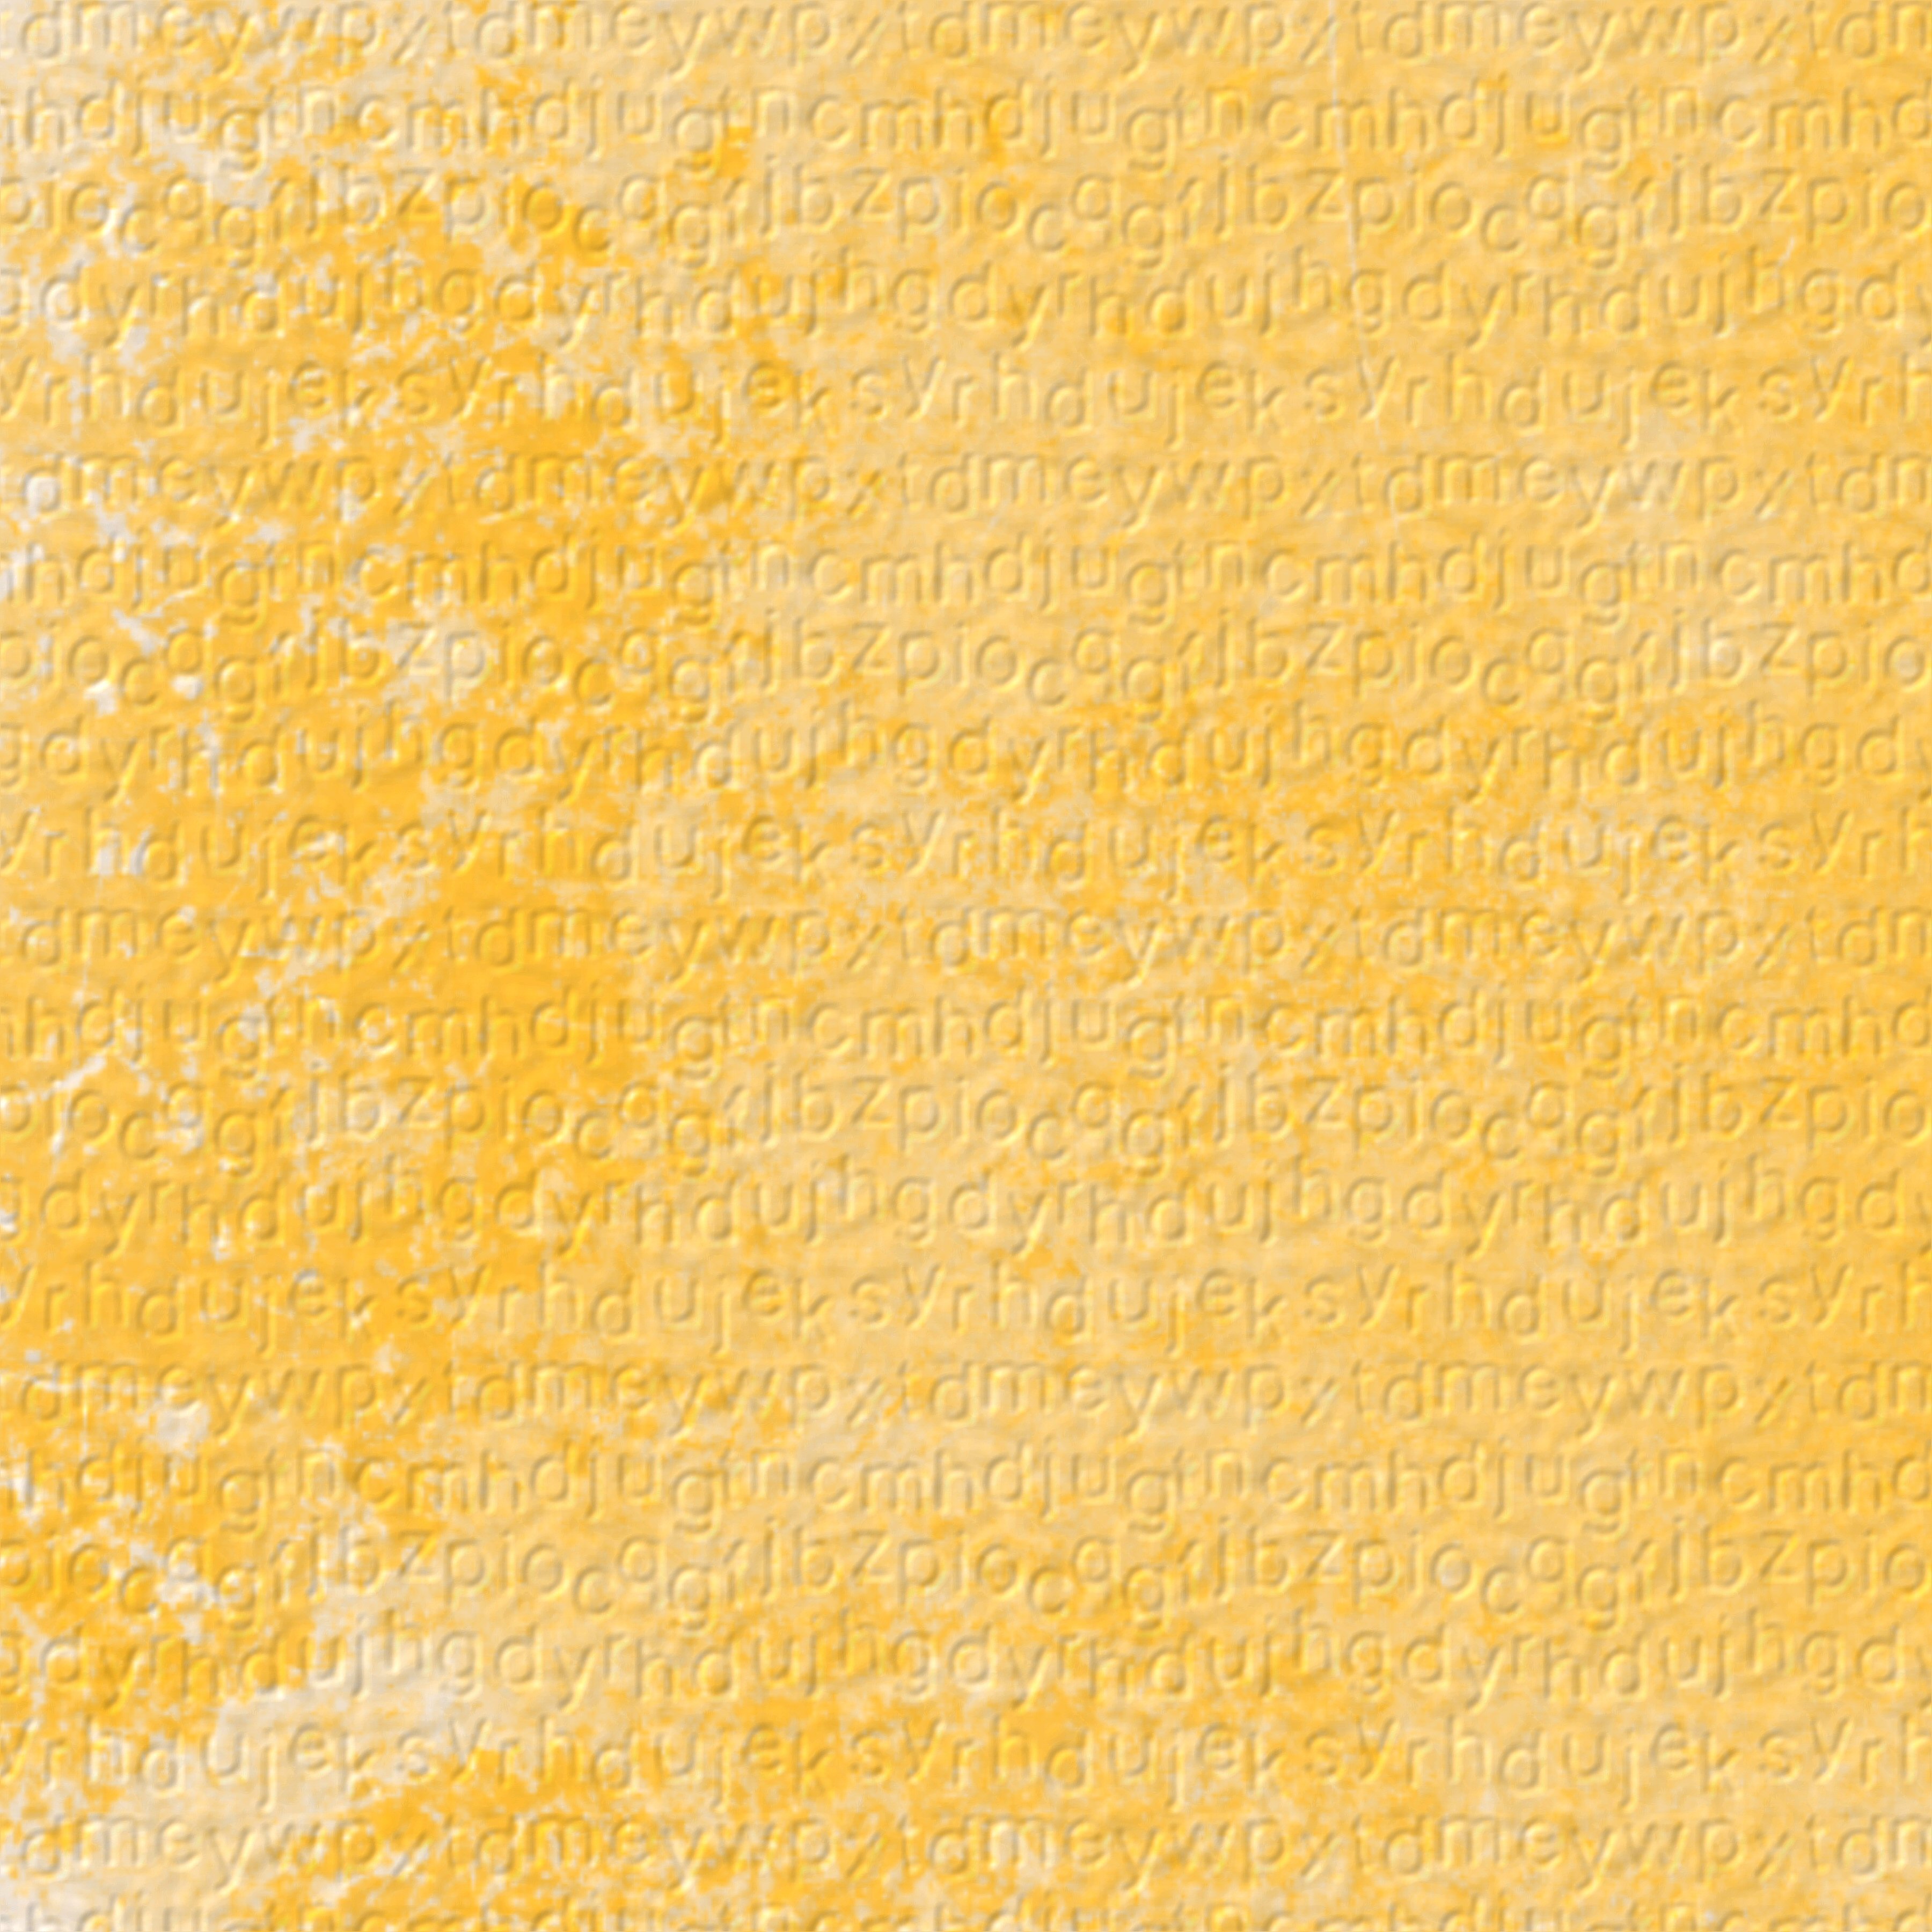 Image About Orange Yellow And Gold Texture